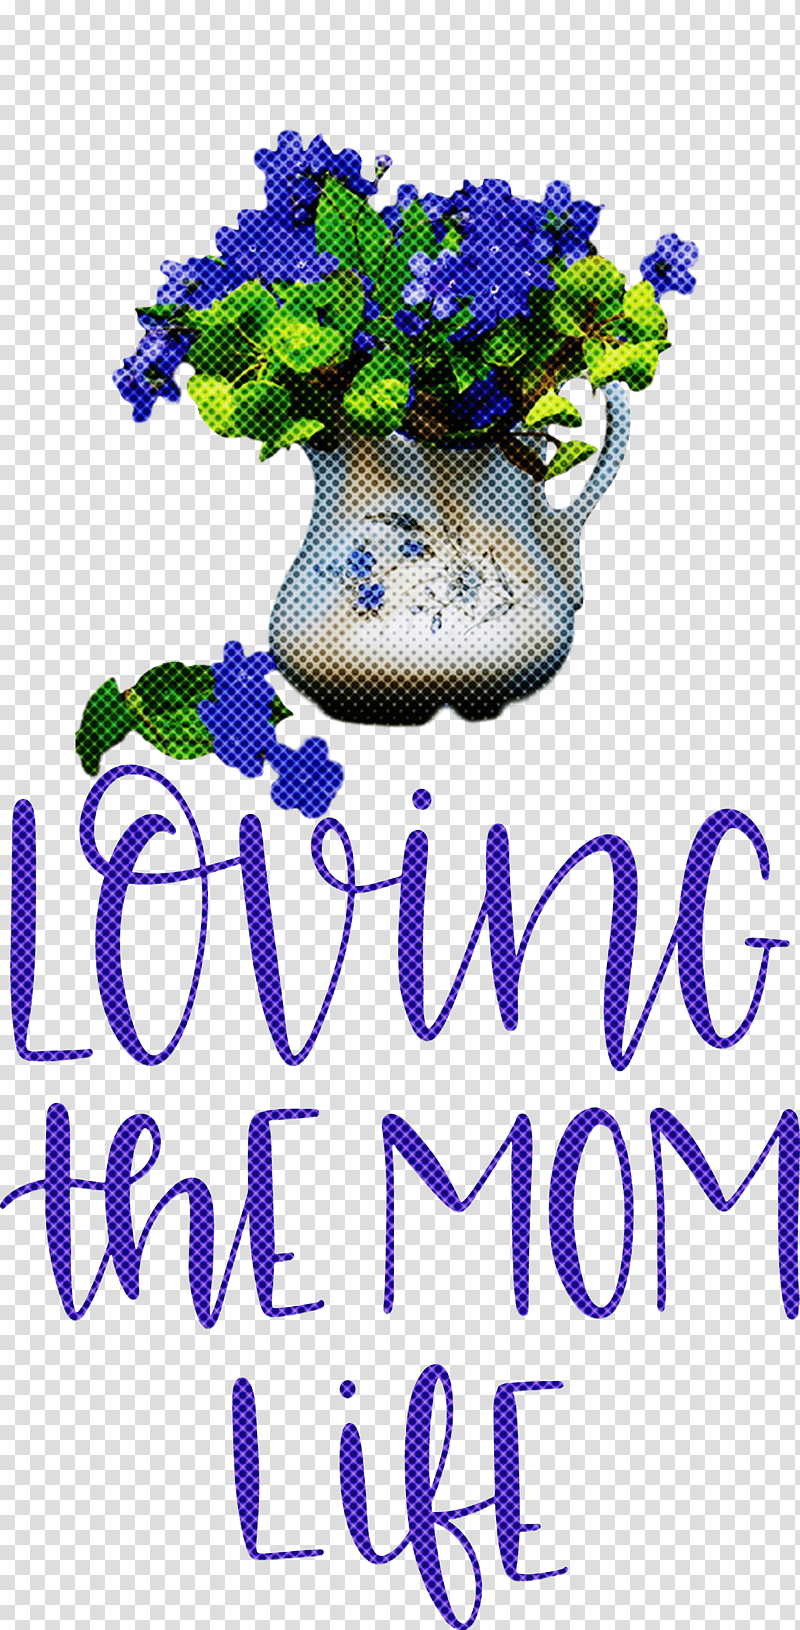 Mothers Day Mothers Day Quote Loving The Mom Life, Floral Design, Cut Flowers, Cobalt Blue, Lilac M, Tree, Lavender transparent background PNG clipart